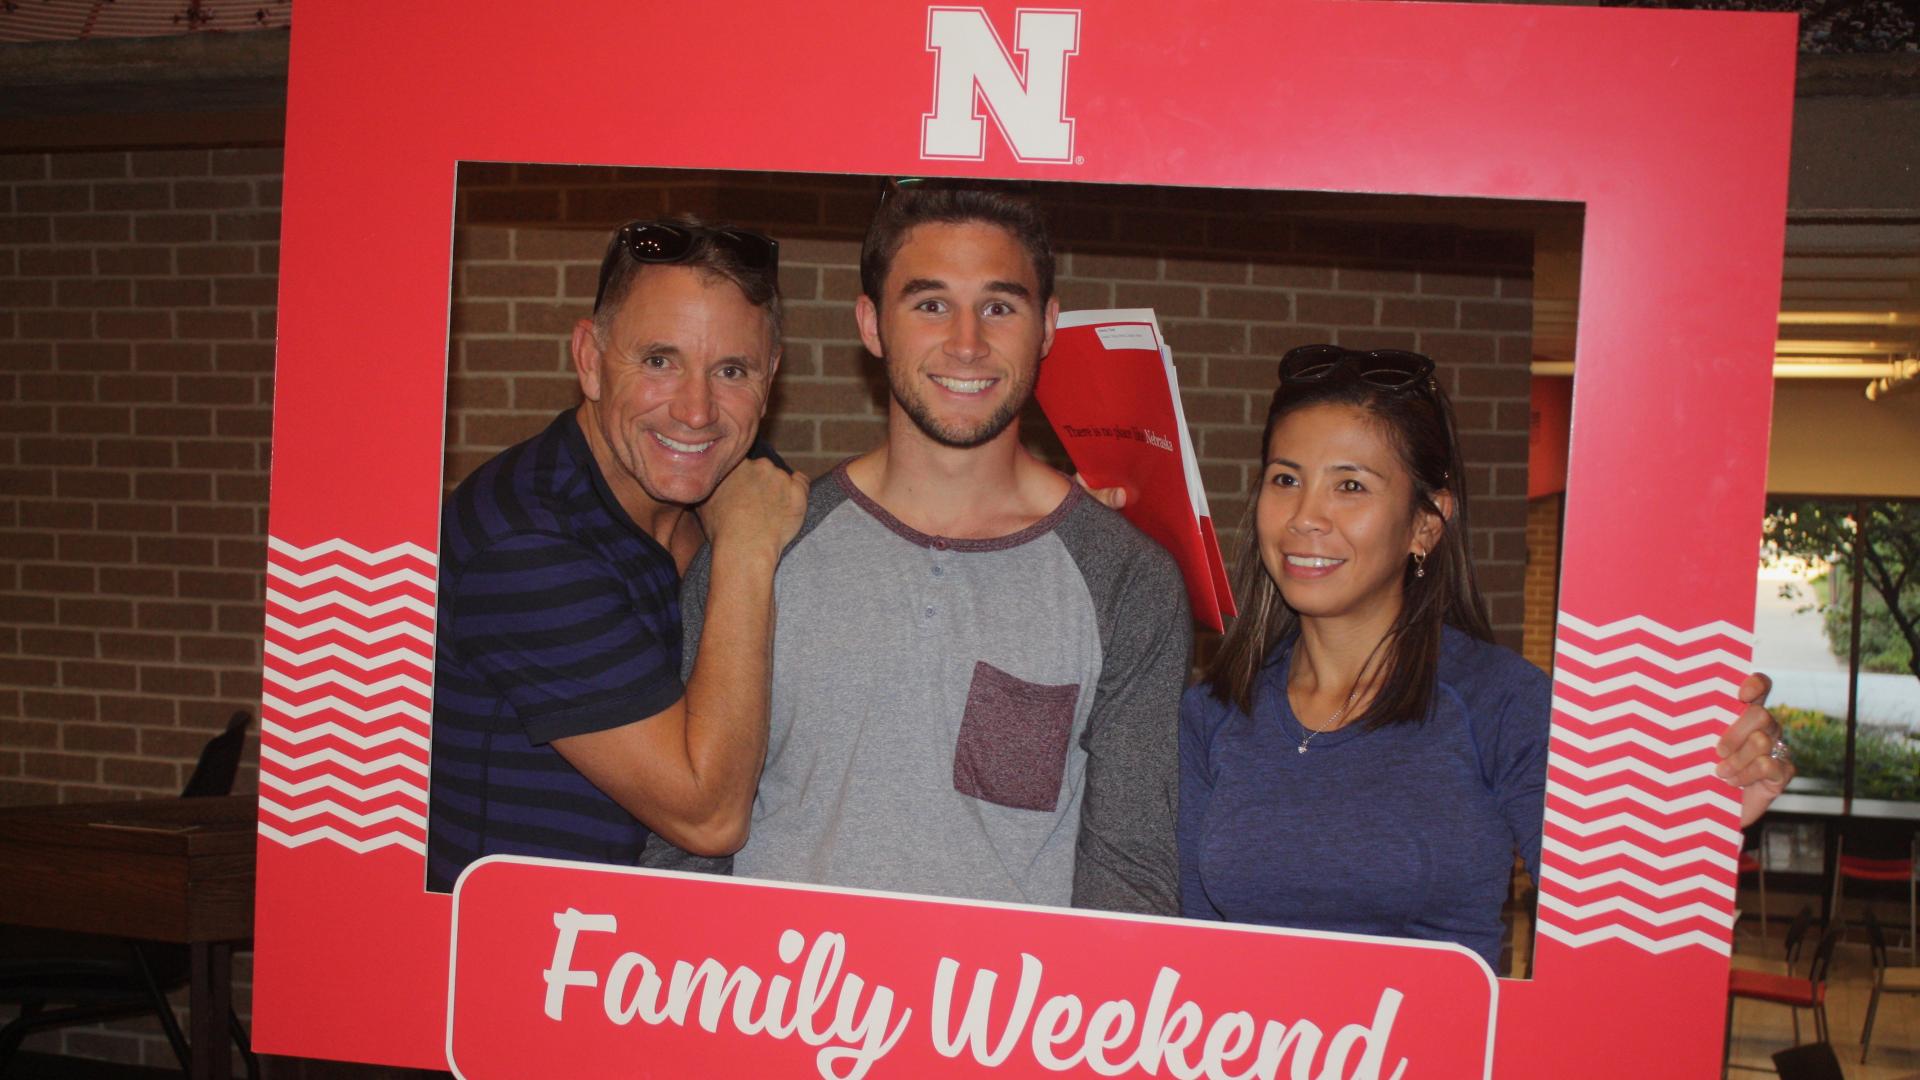 The free registration form is open for Family Weekend. Registrants will gain access to area hotels at preferred rates.